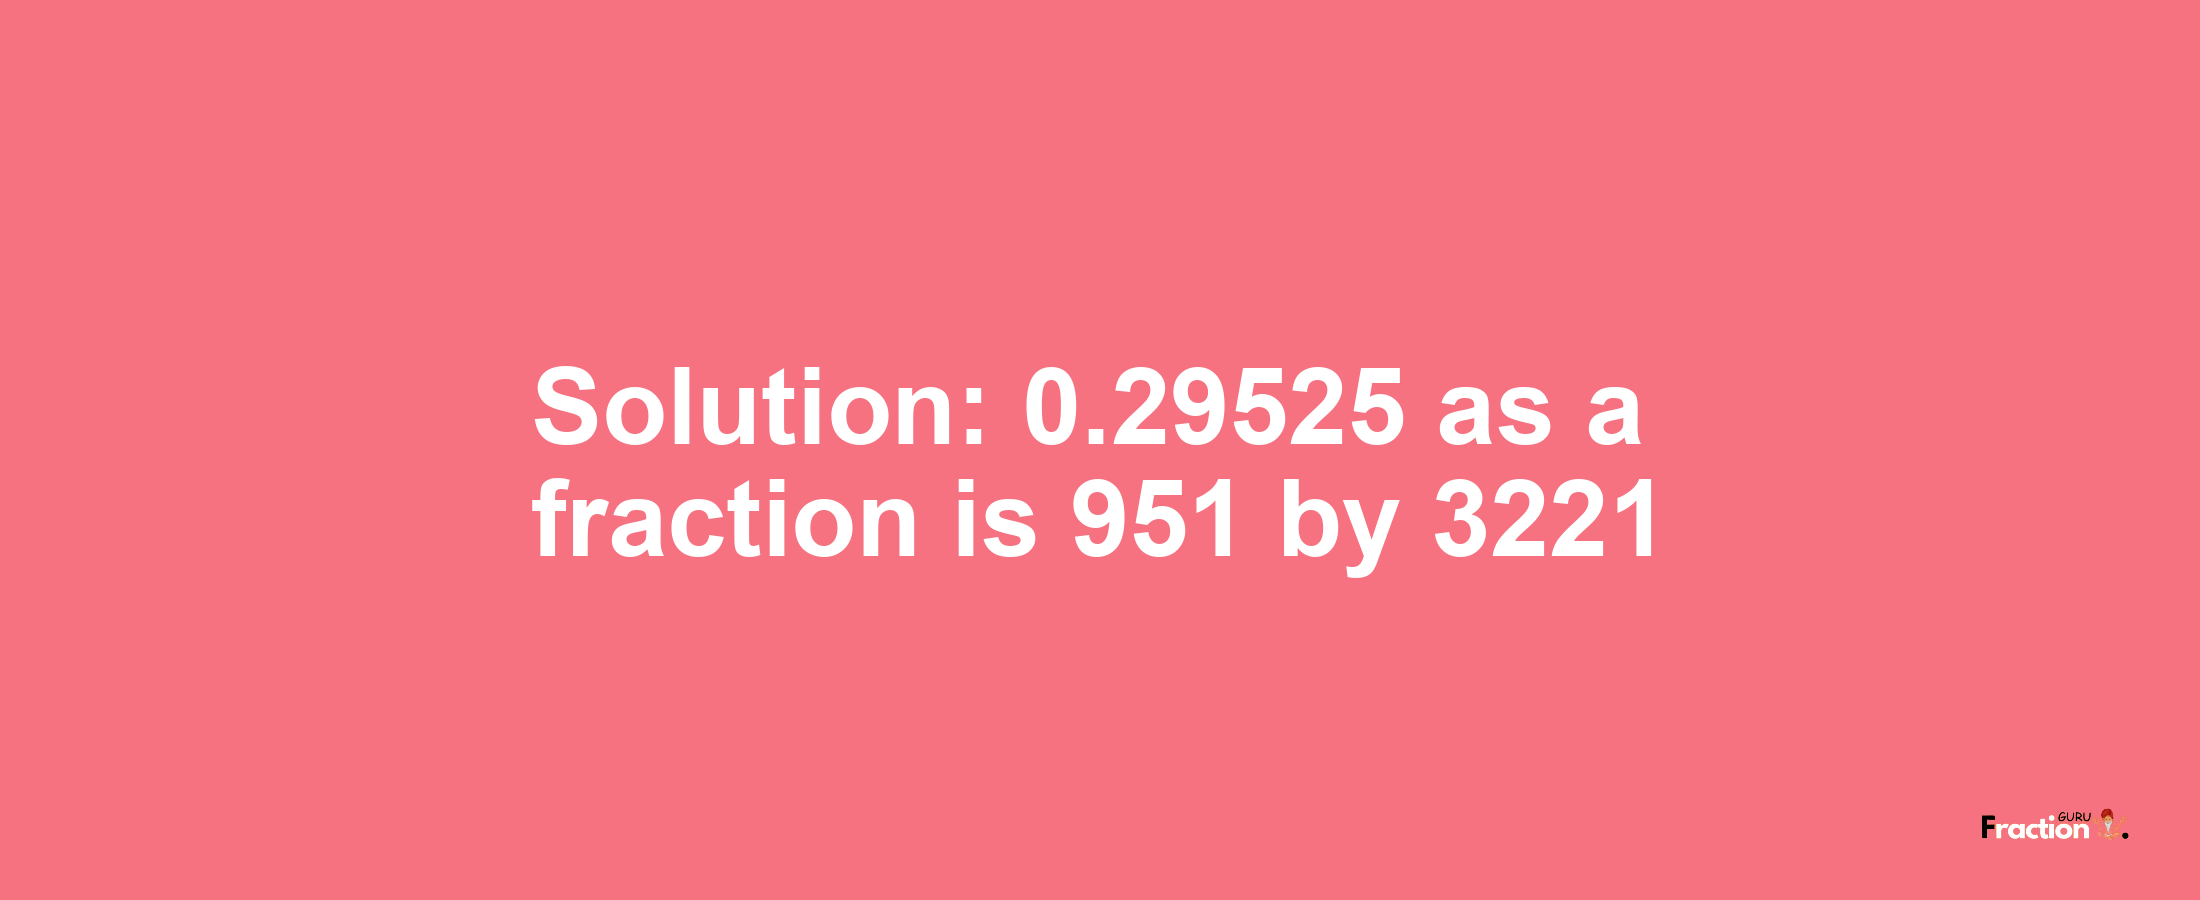 Solution:0.29525 as a fraction is 951/3221